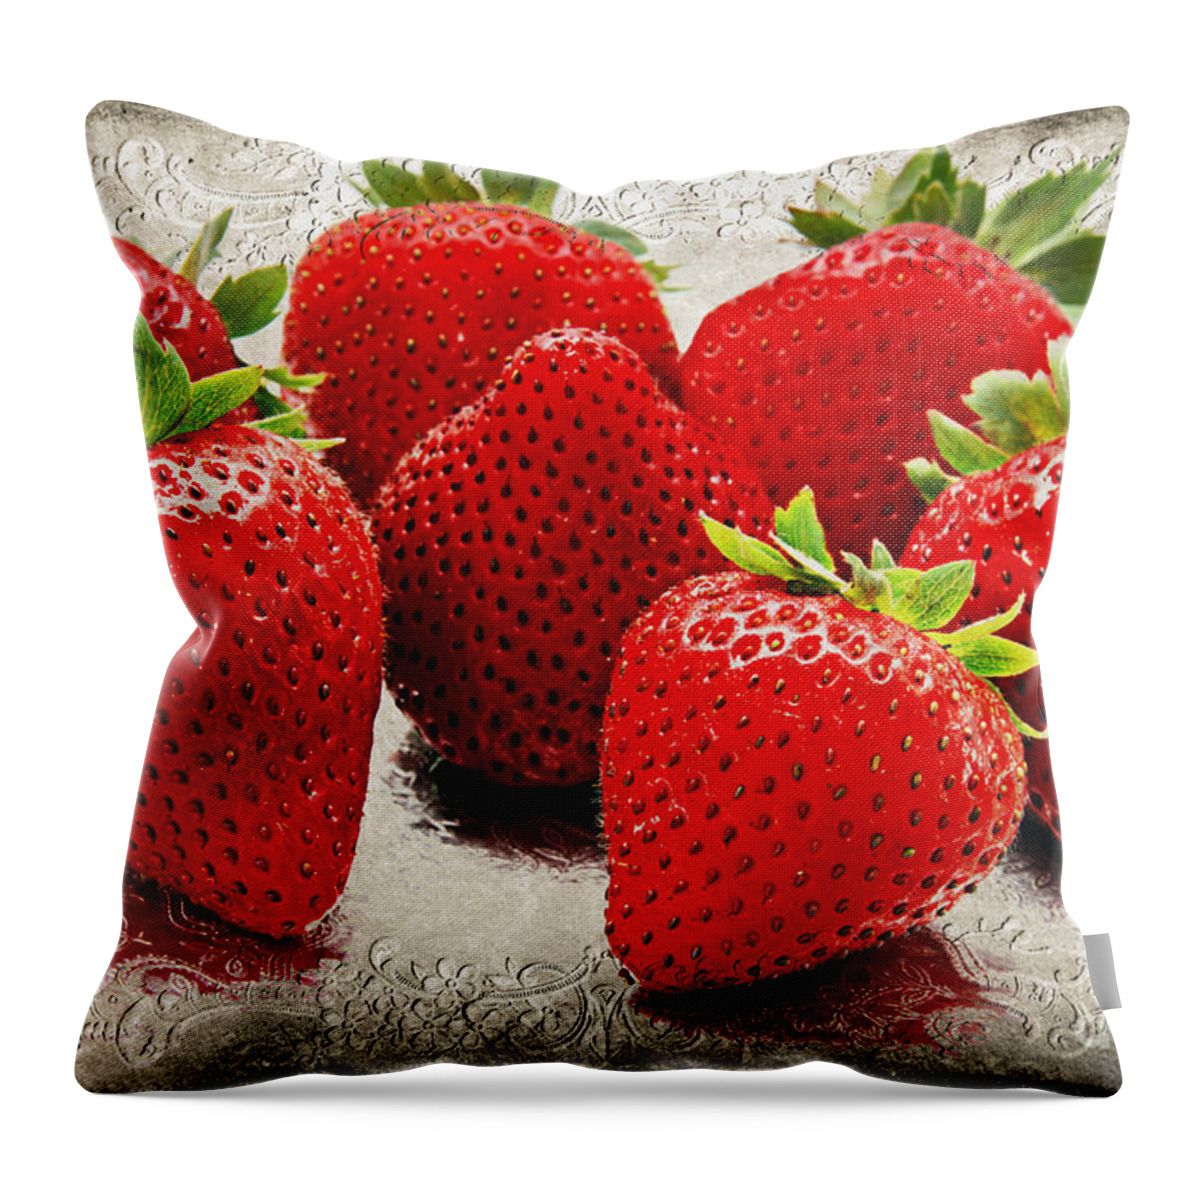 Strawberries Throw Pillow featuring the photograph The Magnificent 7 by Andee Design